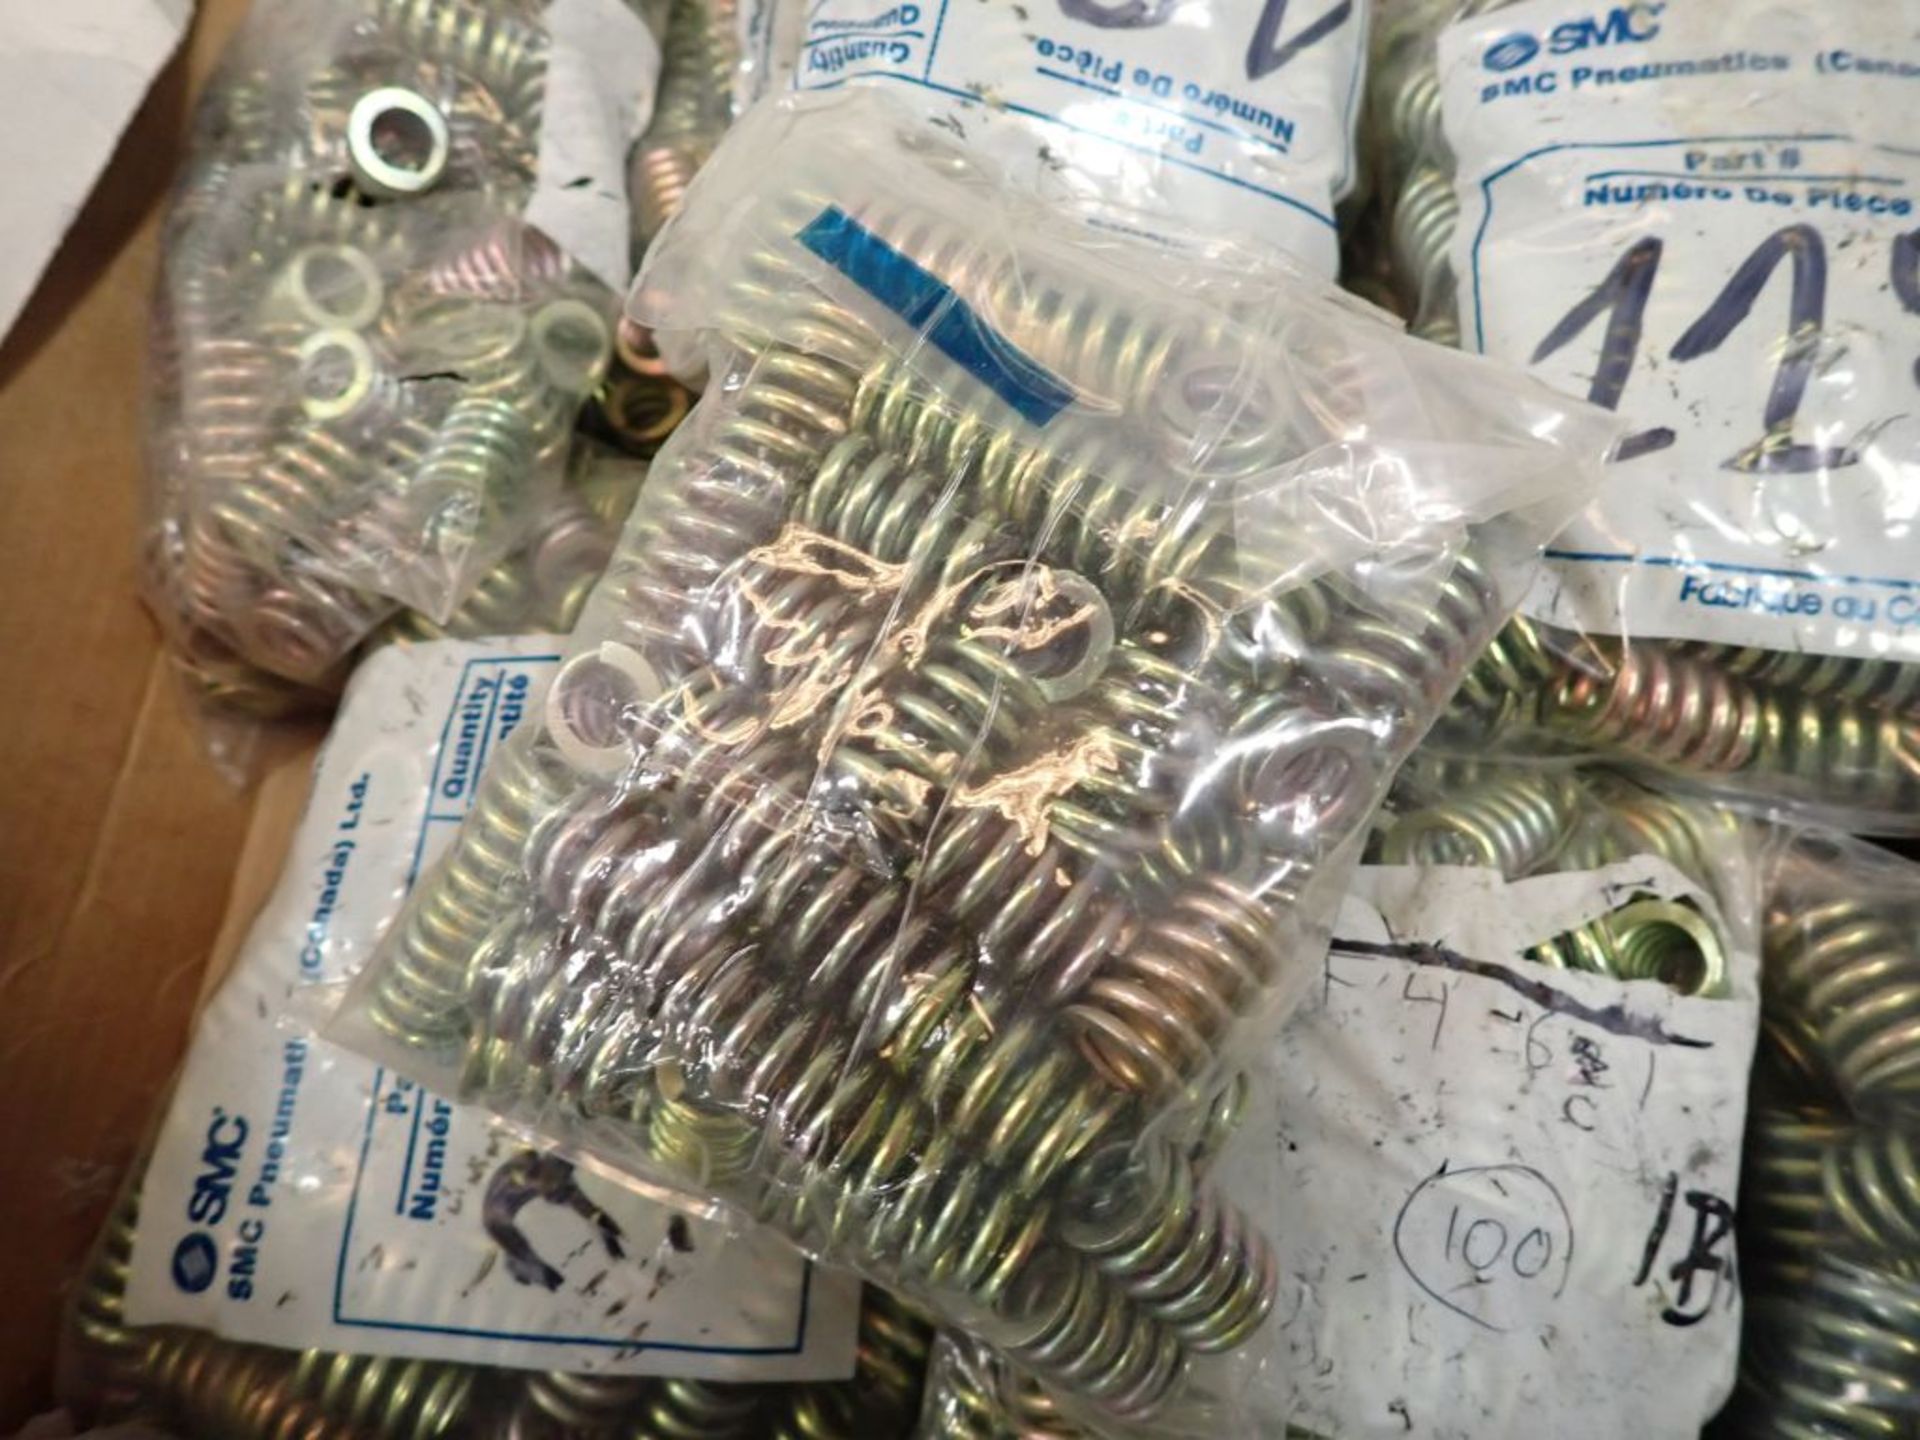 Lot of Approximately (1000) SMC Valve Springs - Image 6 of 7